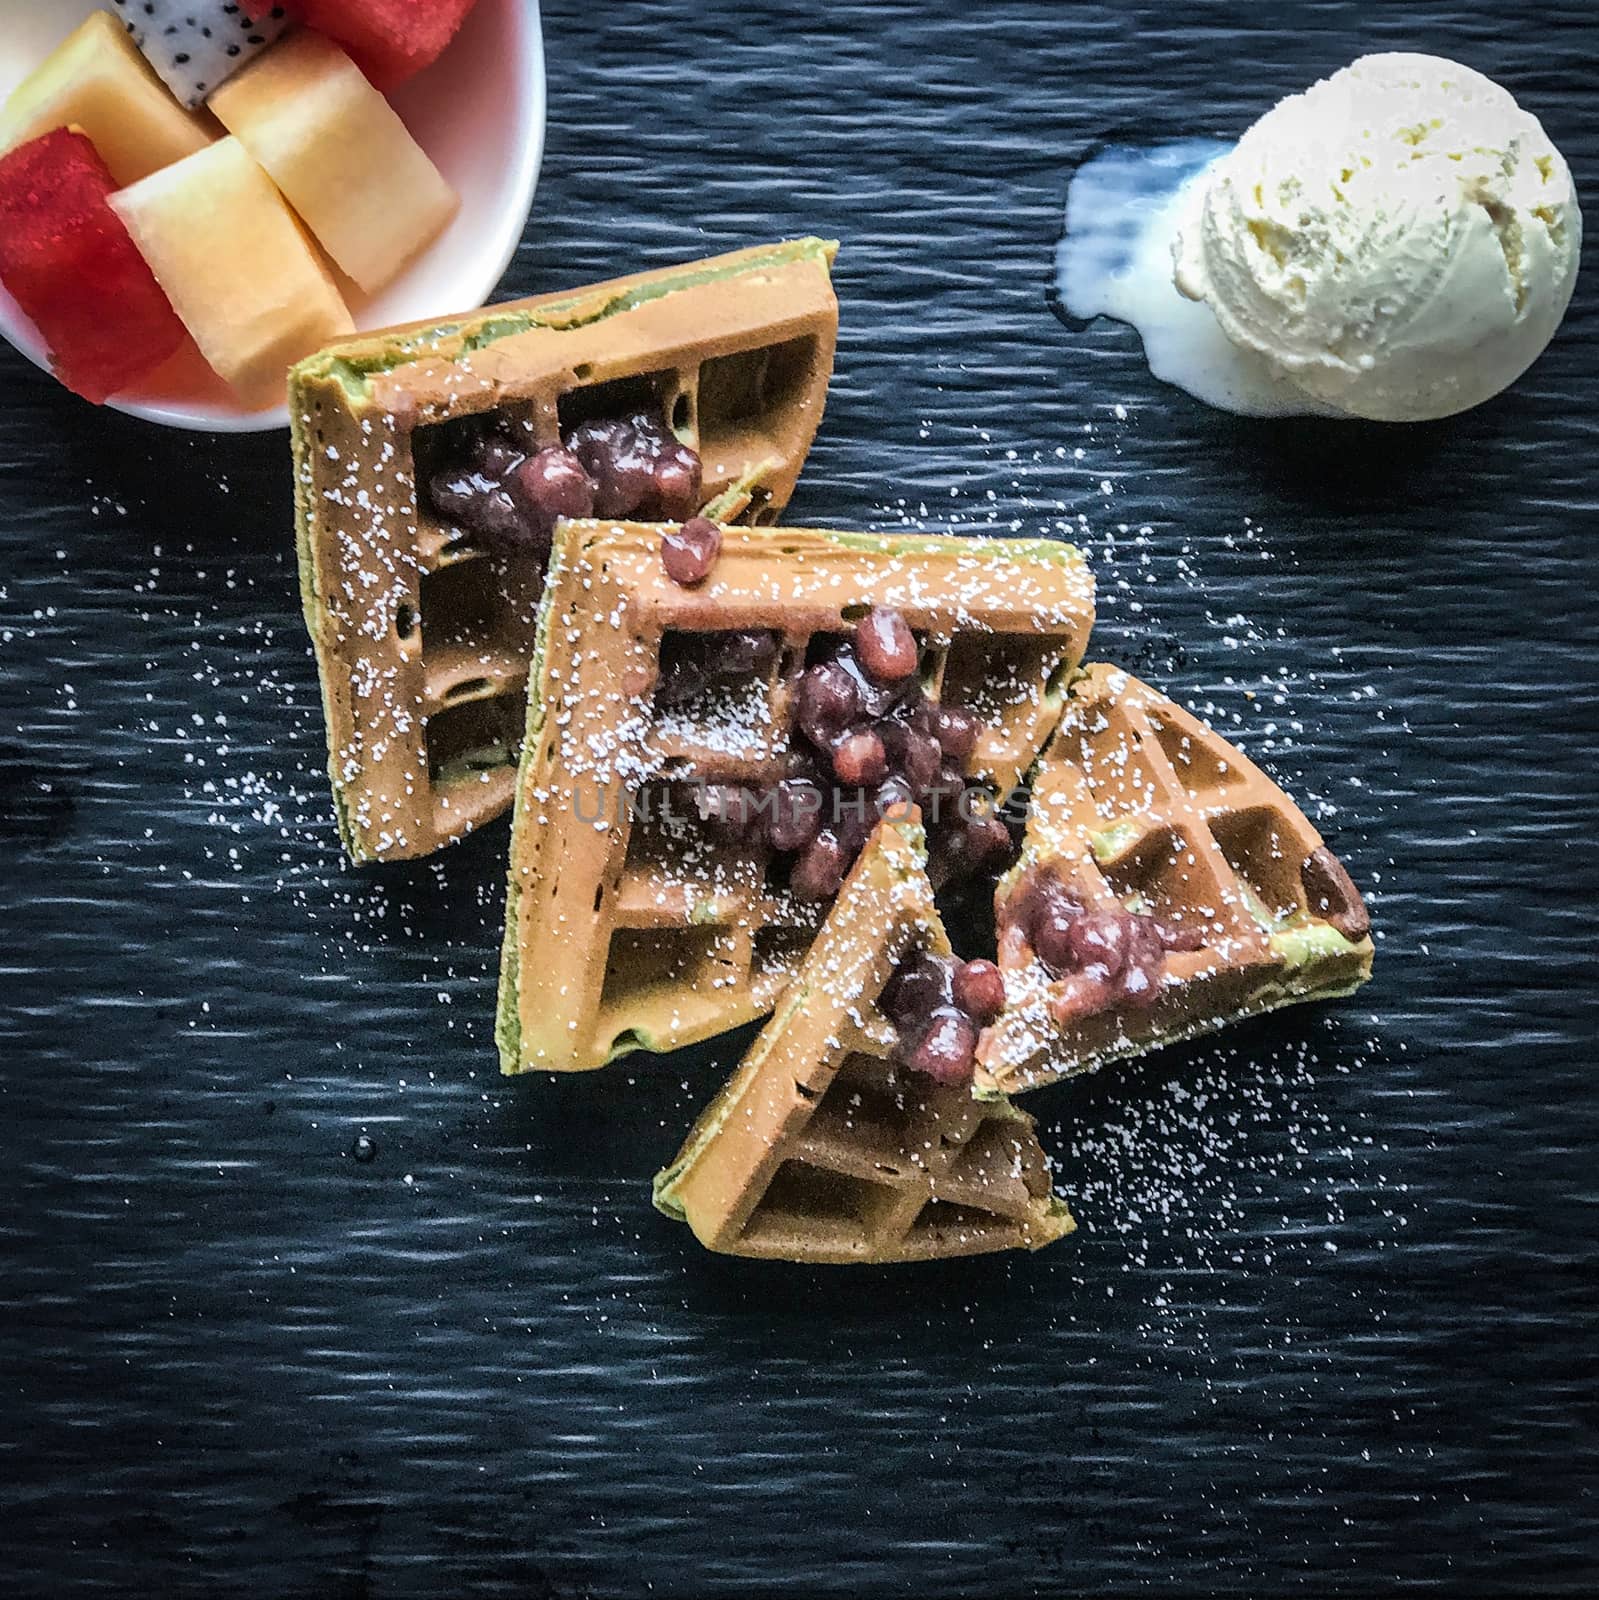 Waffle with red beam, ice cream, fruit on the textured dish